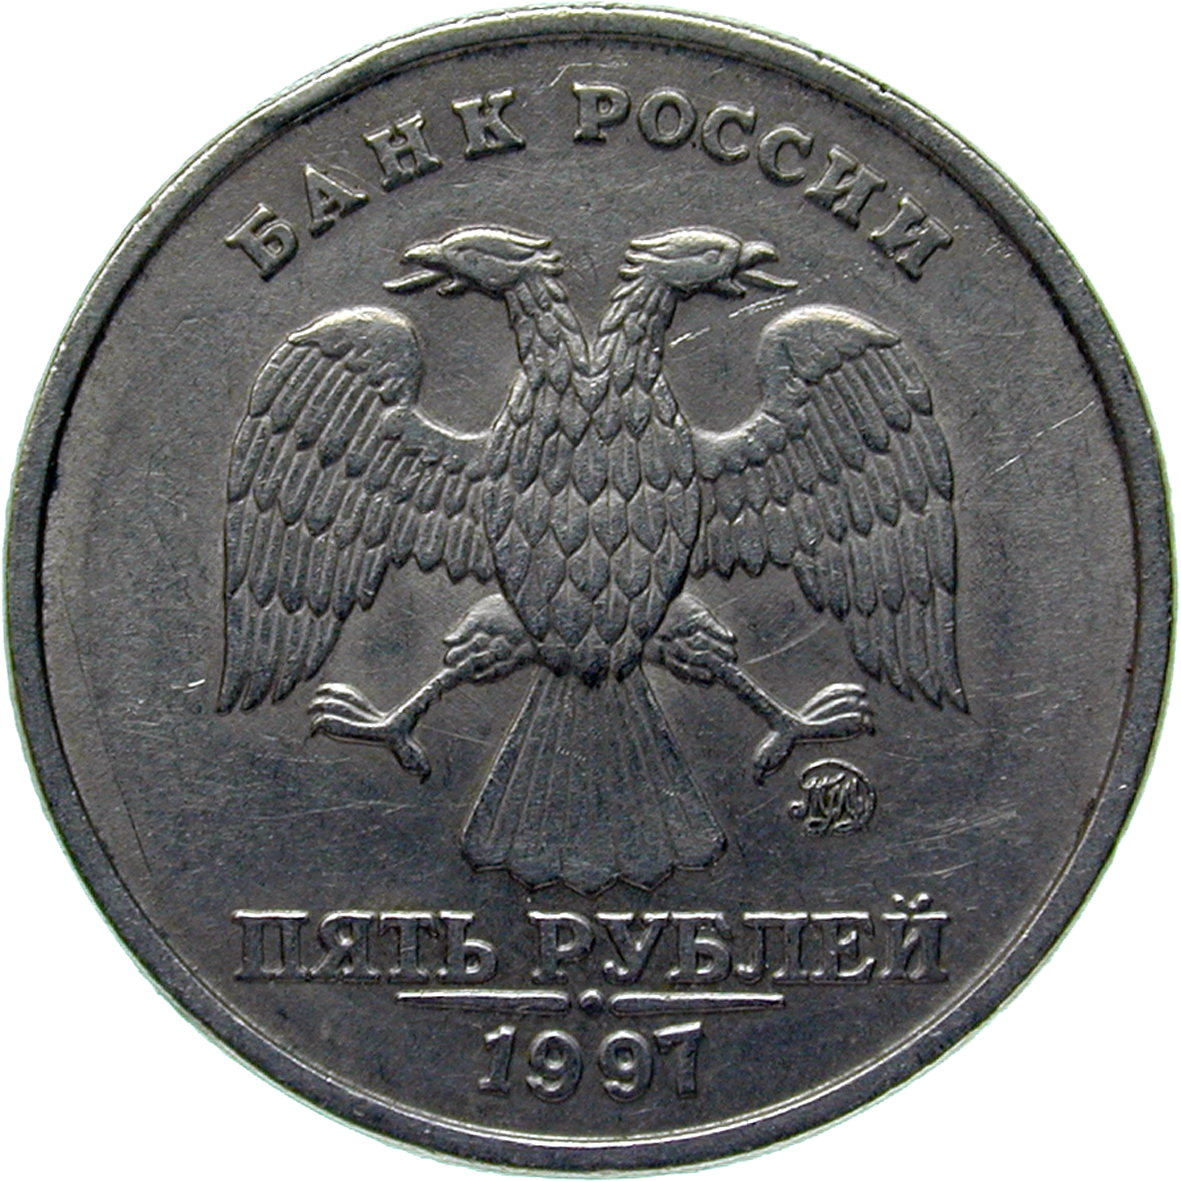 Russian Federation, 5 Rubles 1997 (obverse)